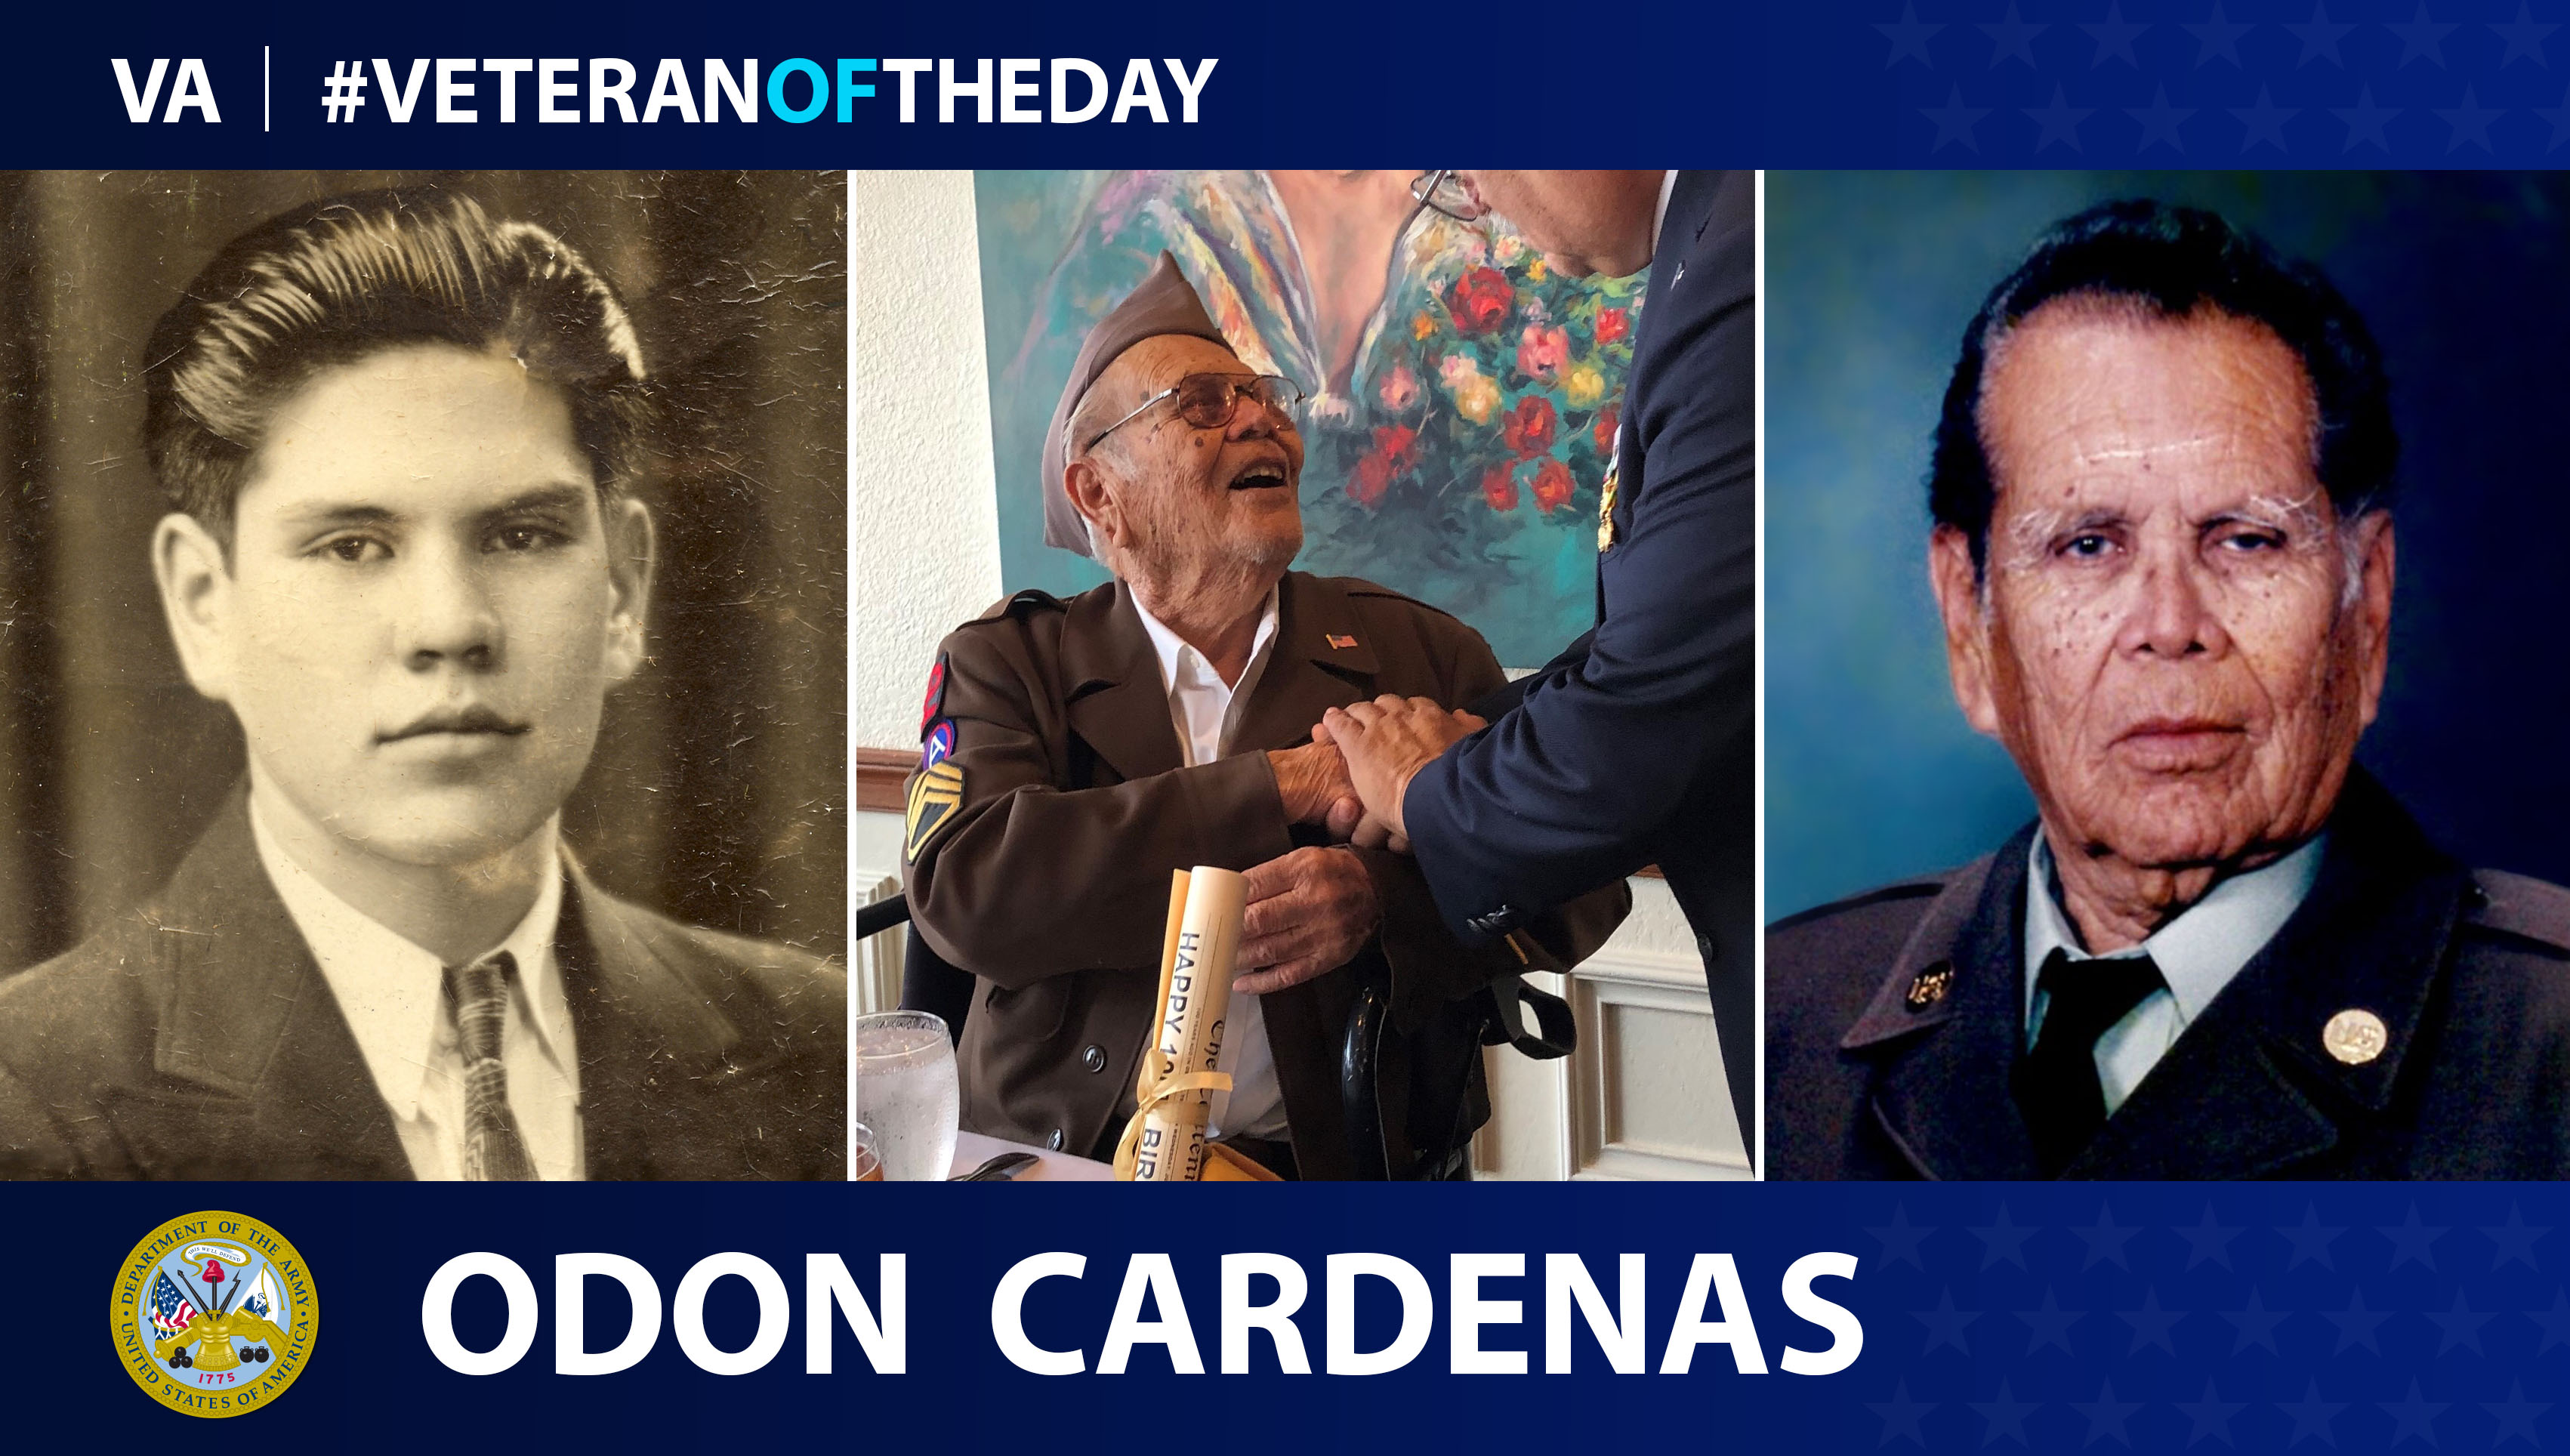 Odon Cardenas is today's Veteran of the Day.